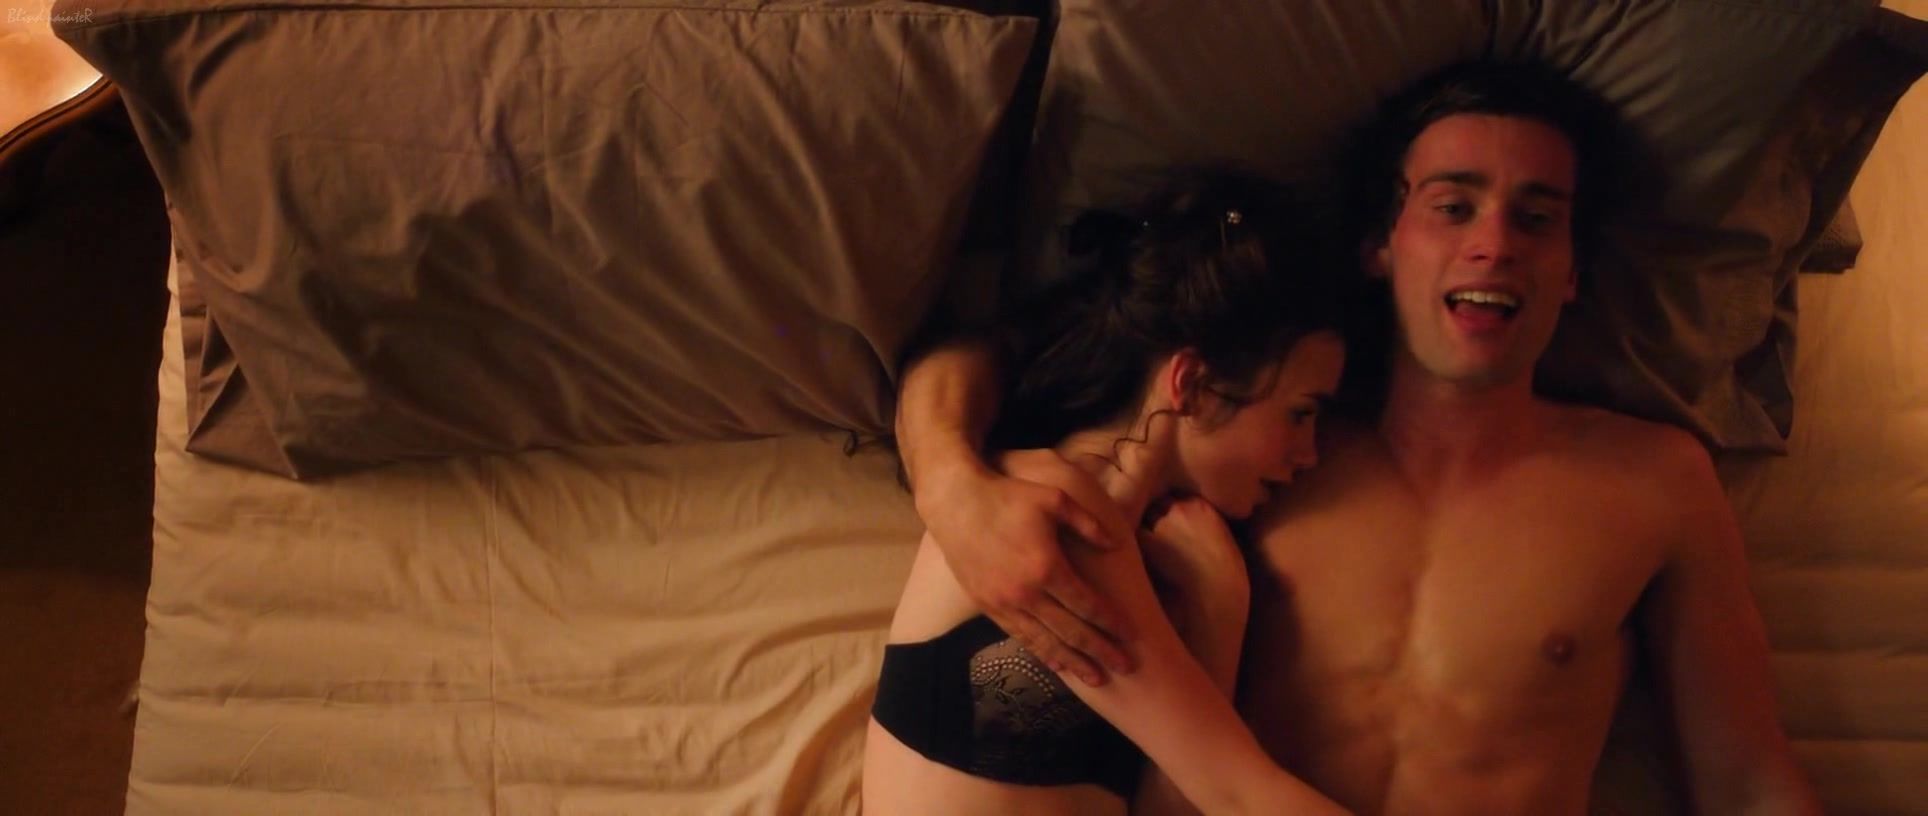 YesPornPlease Sex video Lily Collins hot - Love, Rosie (2014) Hardcore Sex